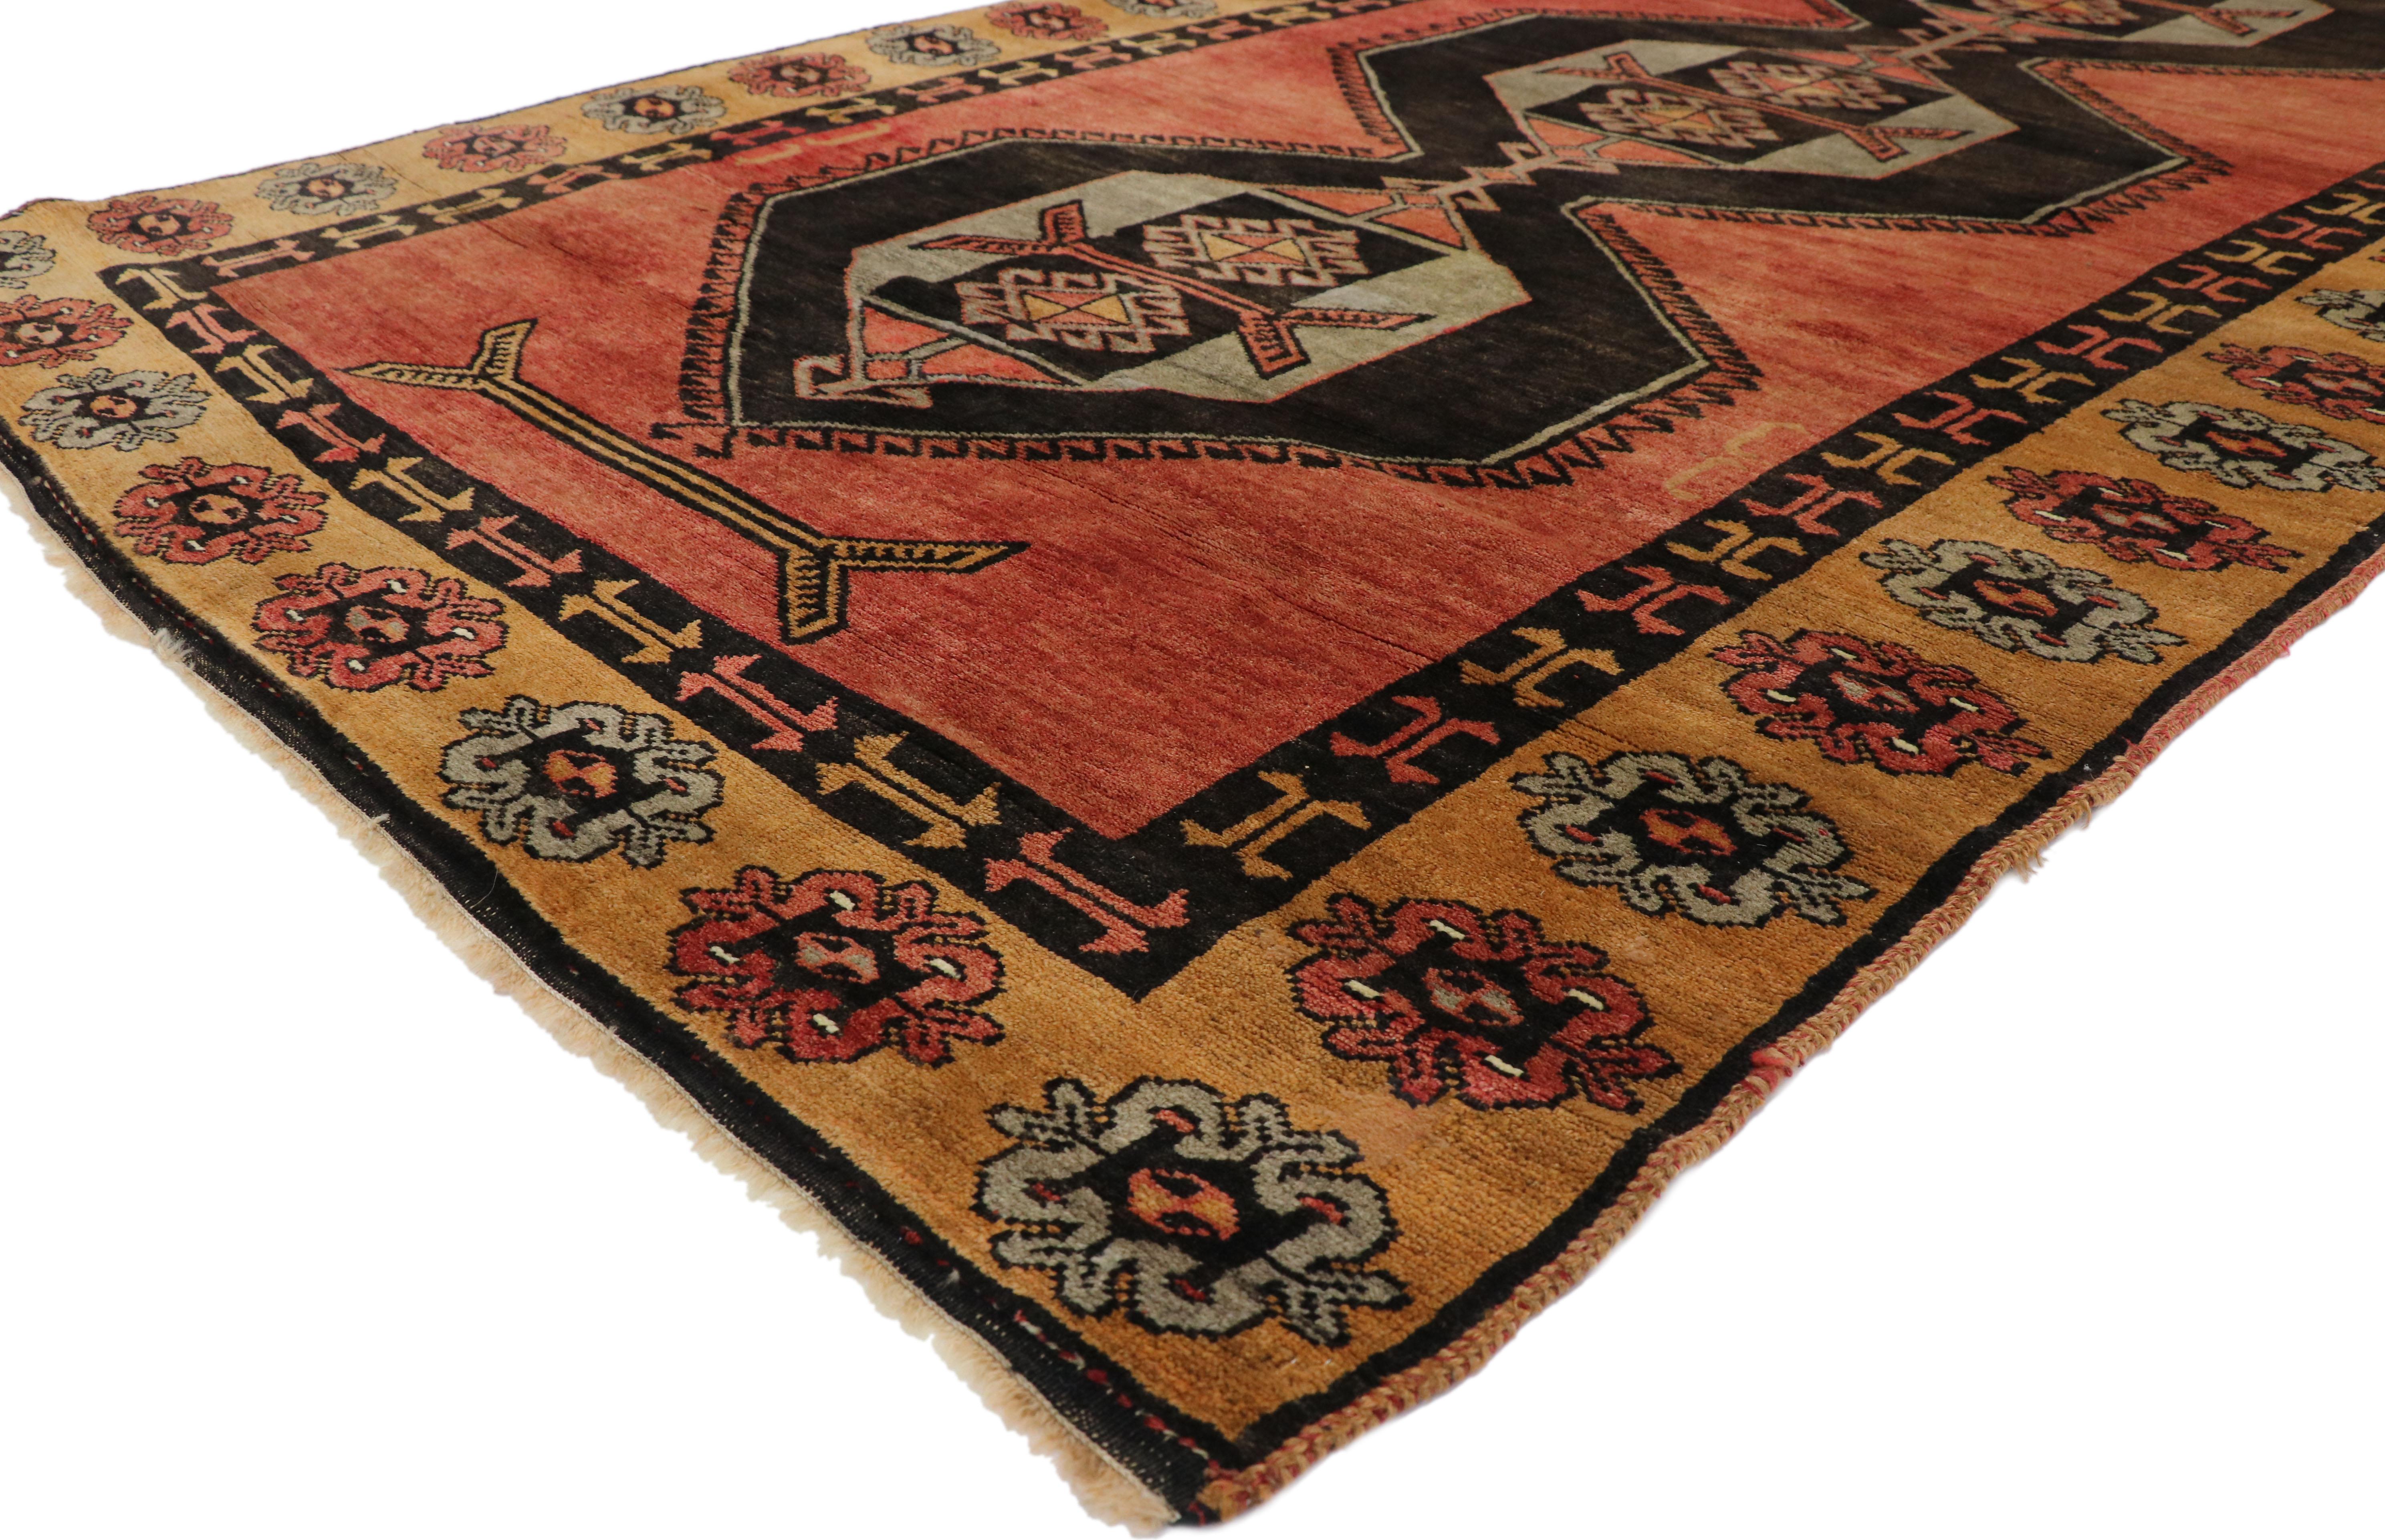 50567 Vintage Turkish Oushak Runner with Mid-Century Modern and Art Deco Style. Displaying balanced symmetry and a bold geometric design, this hand-knotted wool vintage Turkish Oushak runner features an all-over geometric pattern with five stacked